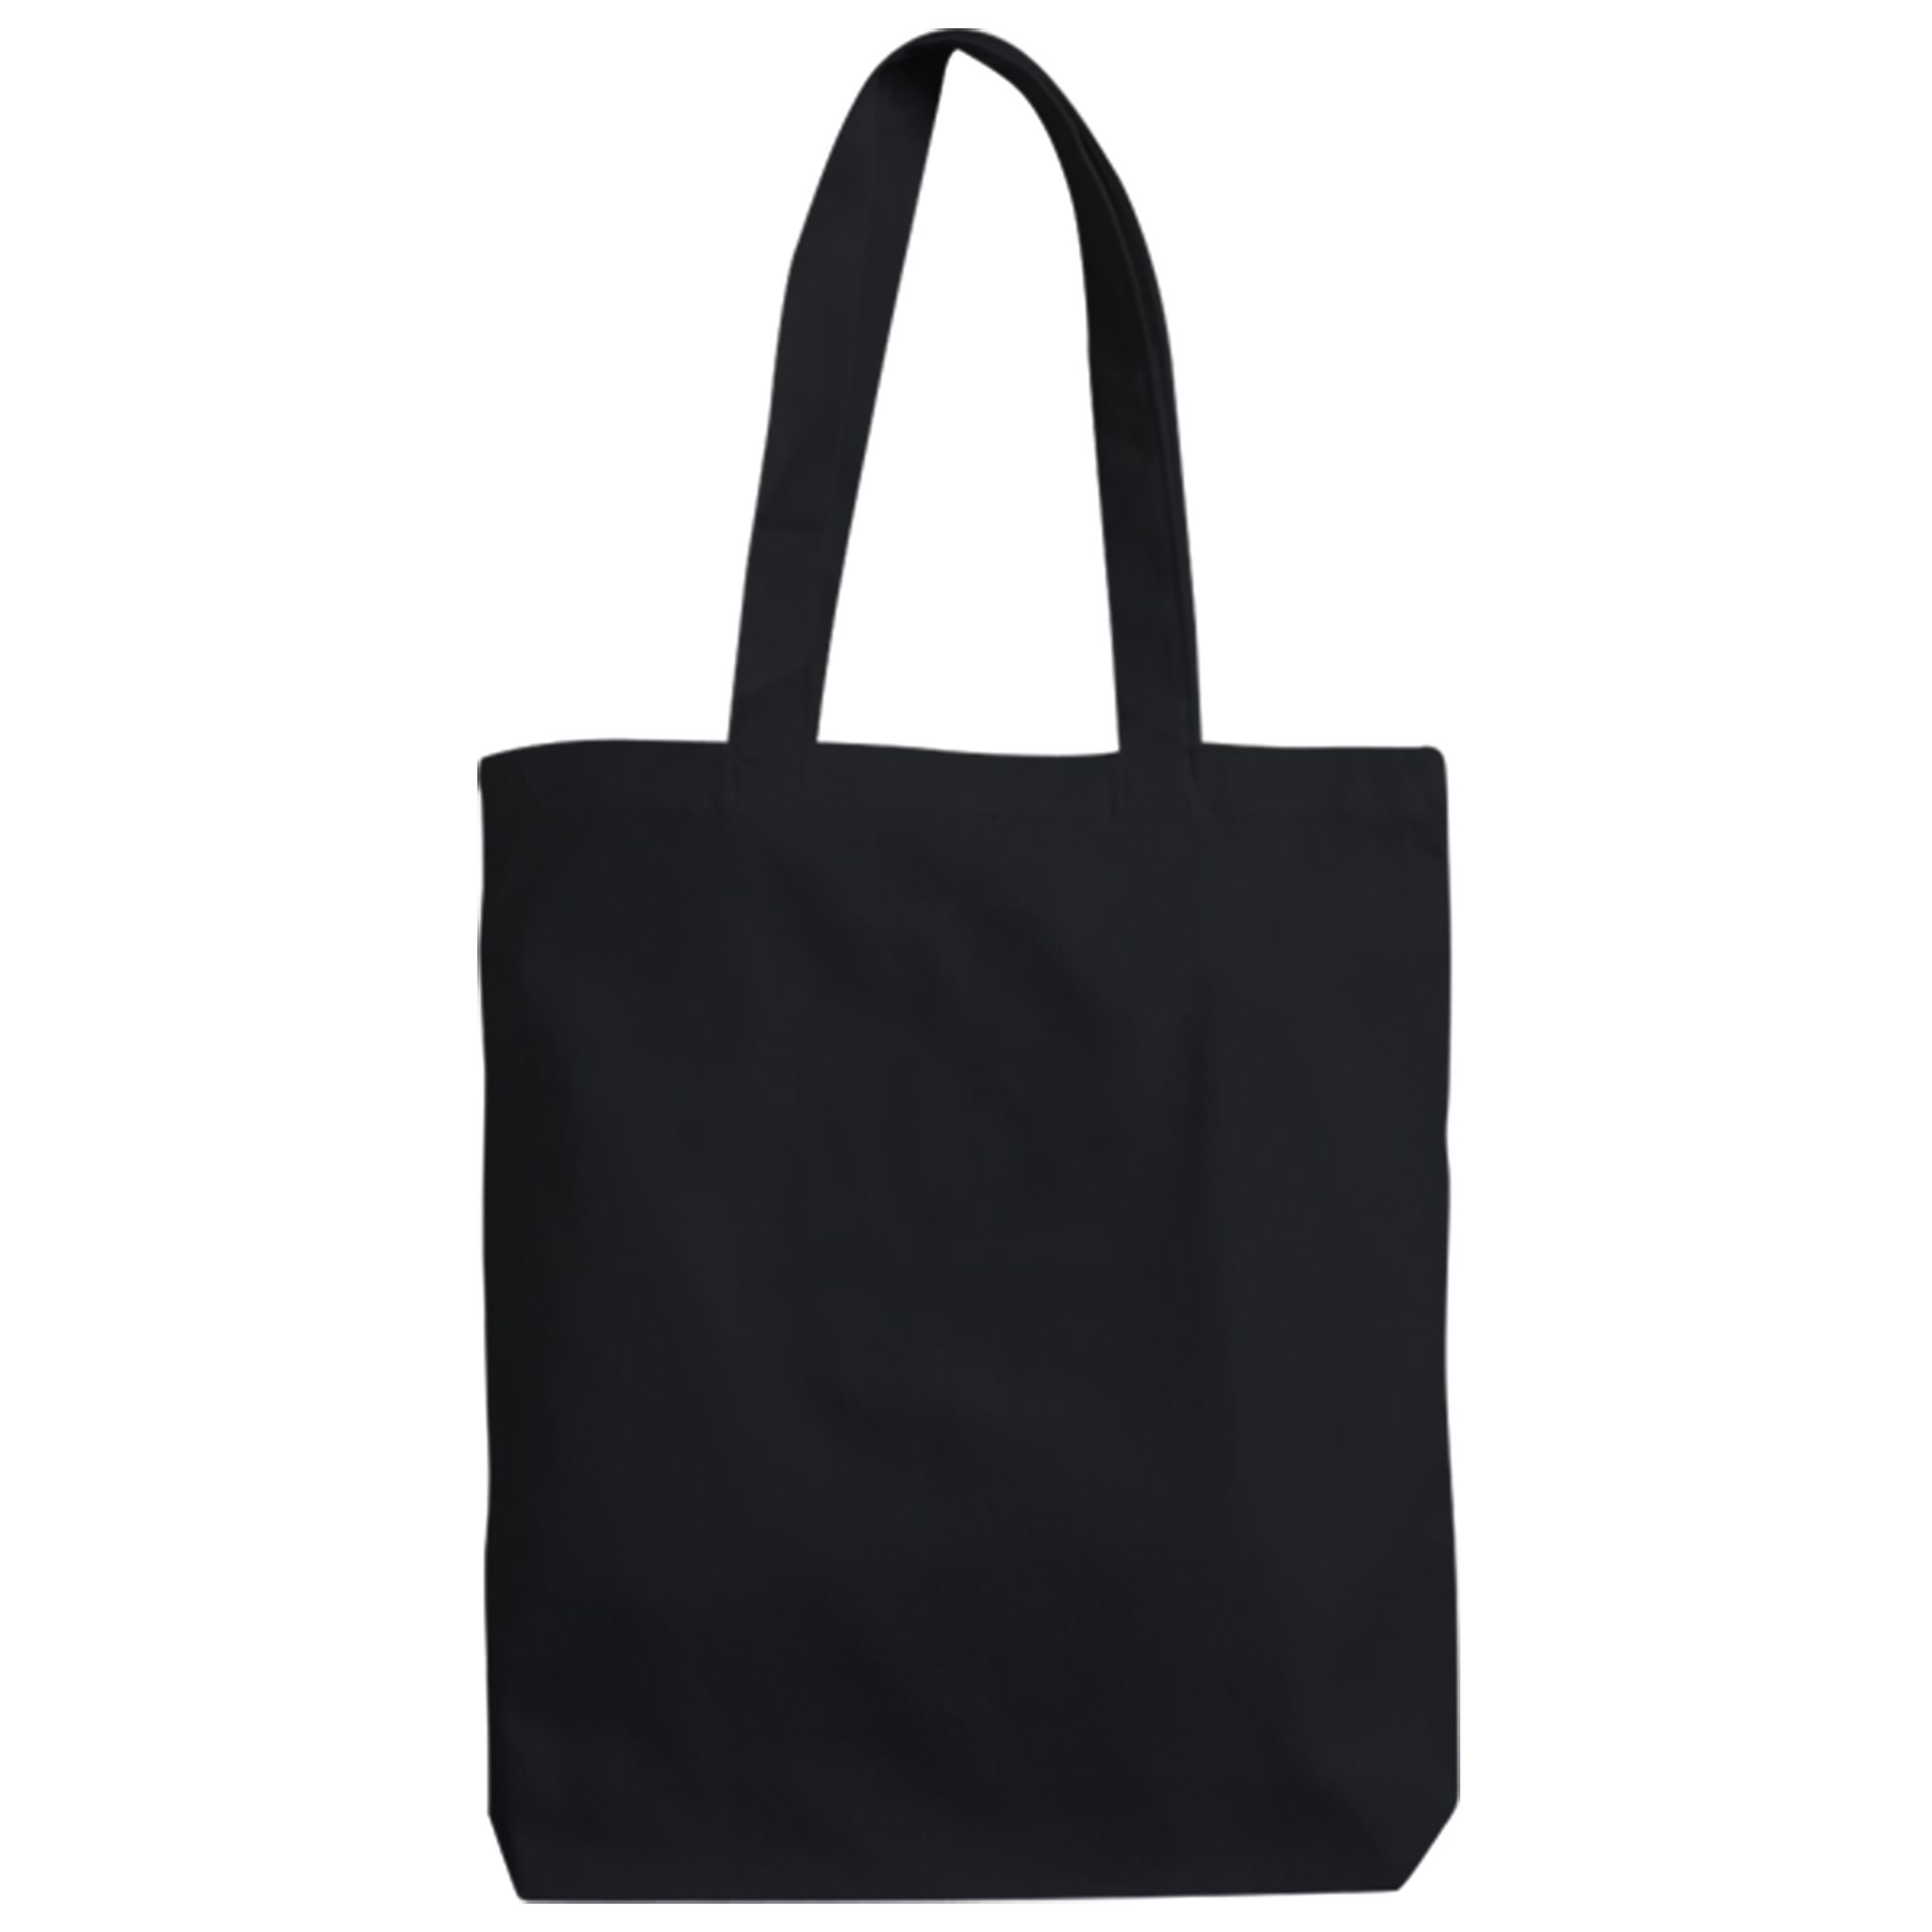 Custom Bag & Tote Bags Philippines - Trusted Custom Uniforms and Corporate  Giveaways Supplier